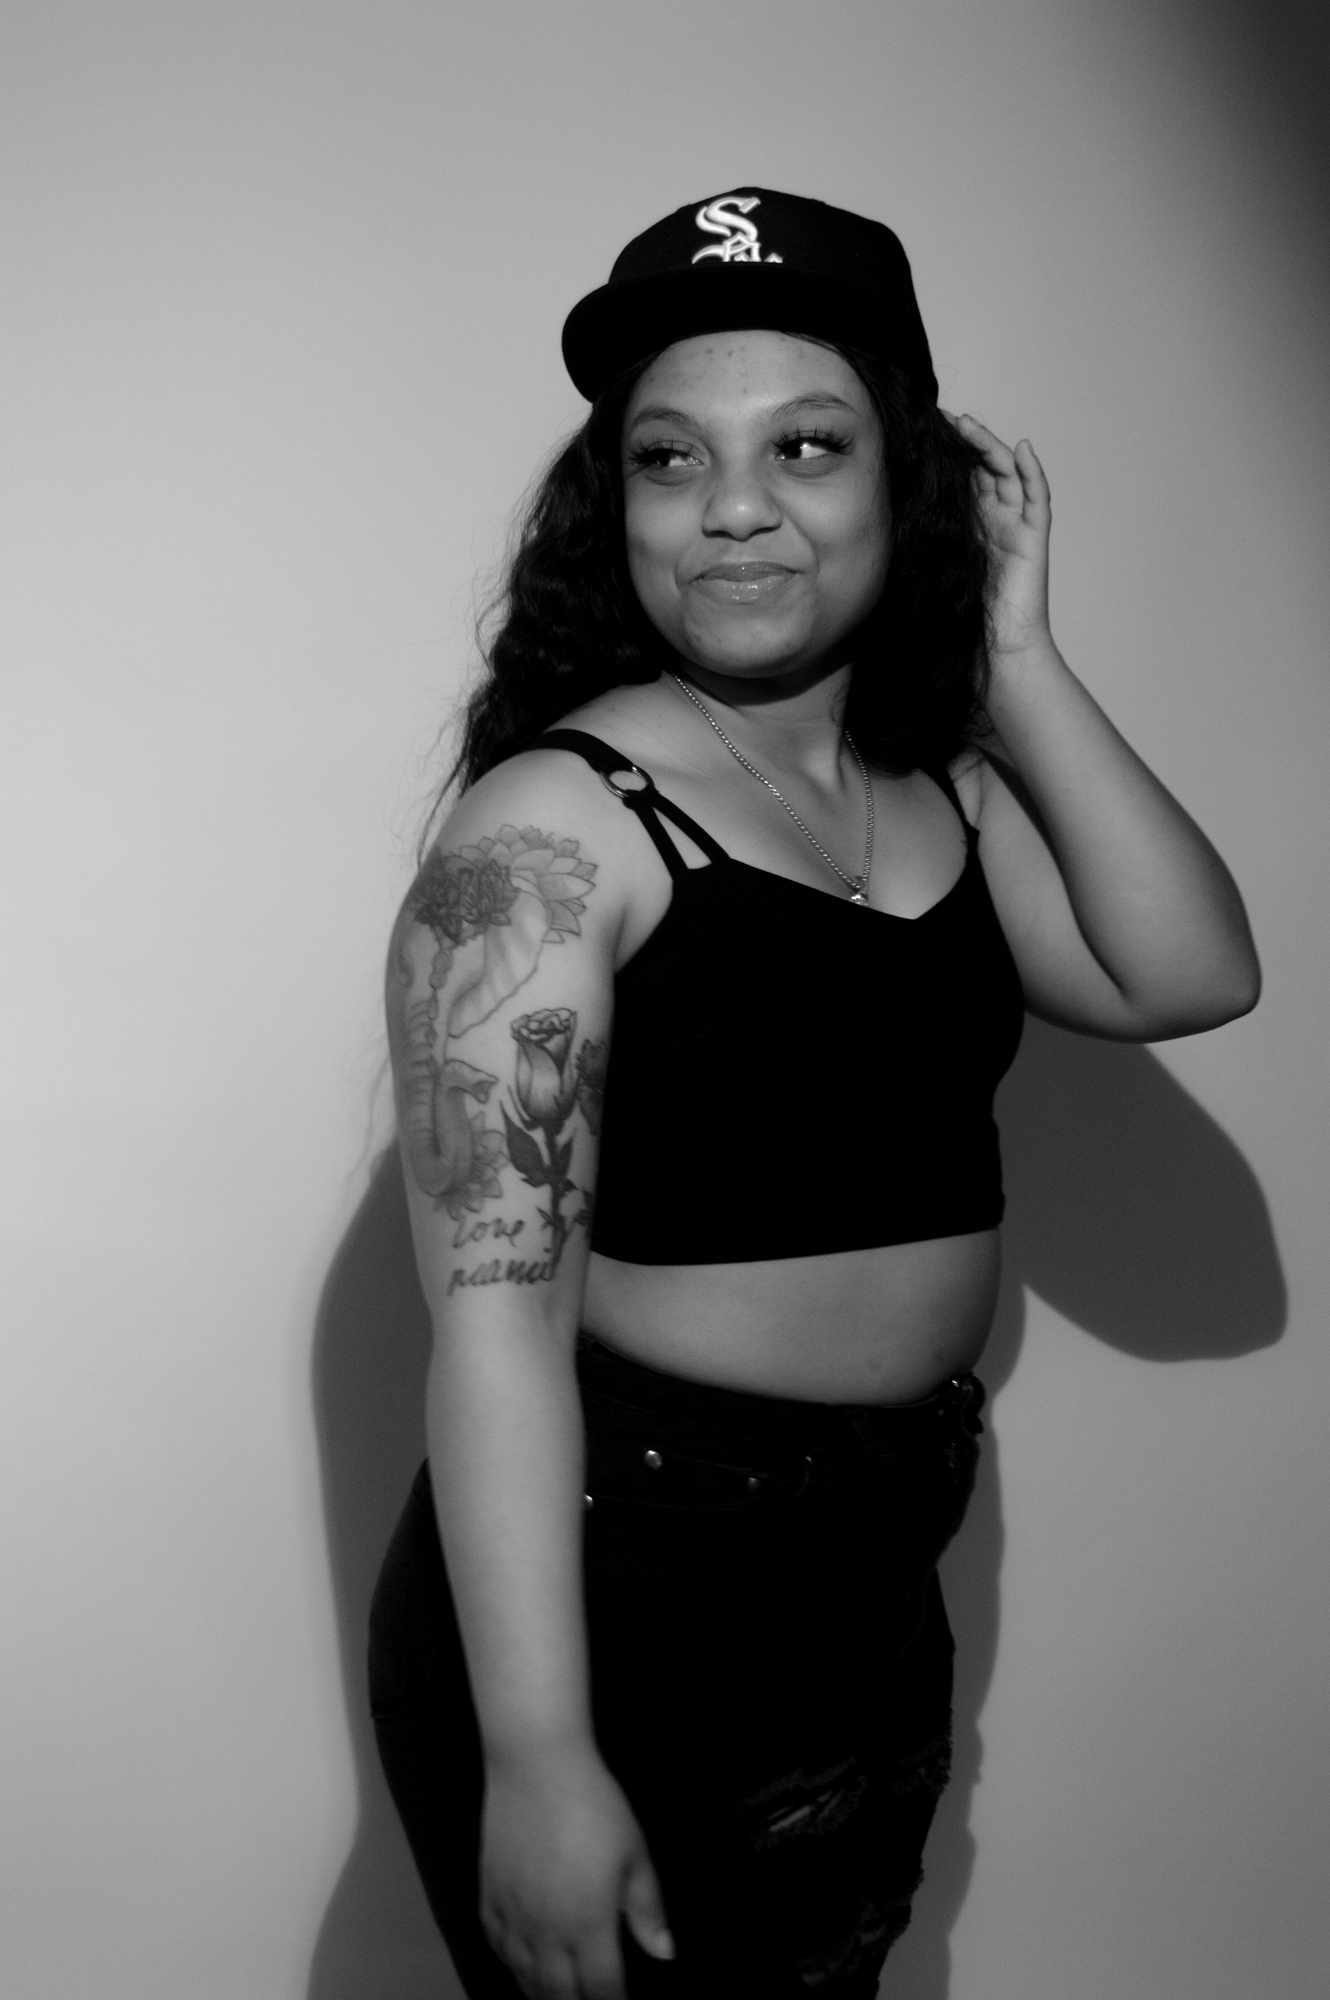 Black and white image of a black female wearing a hat, standing and looking off to the side with a tattoo on her right arm.